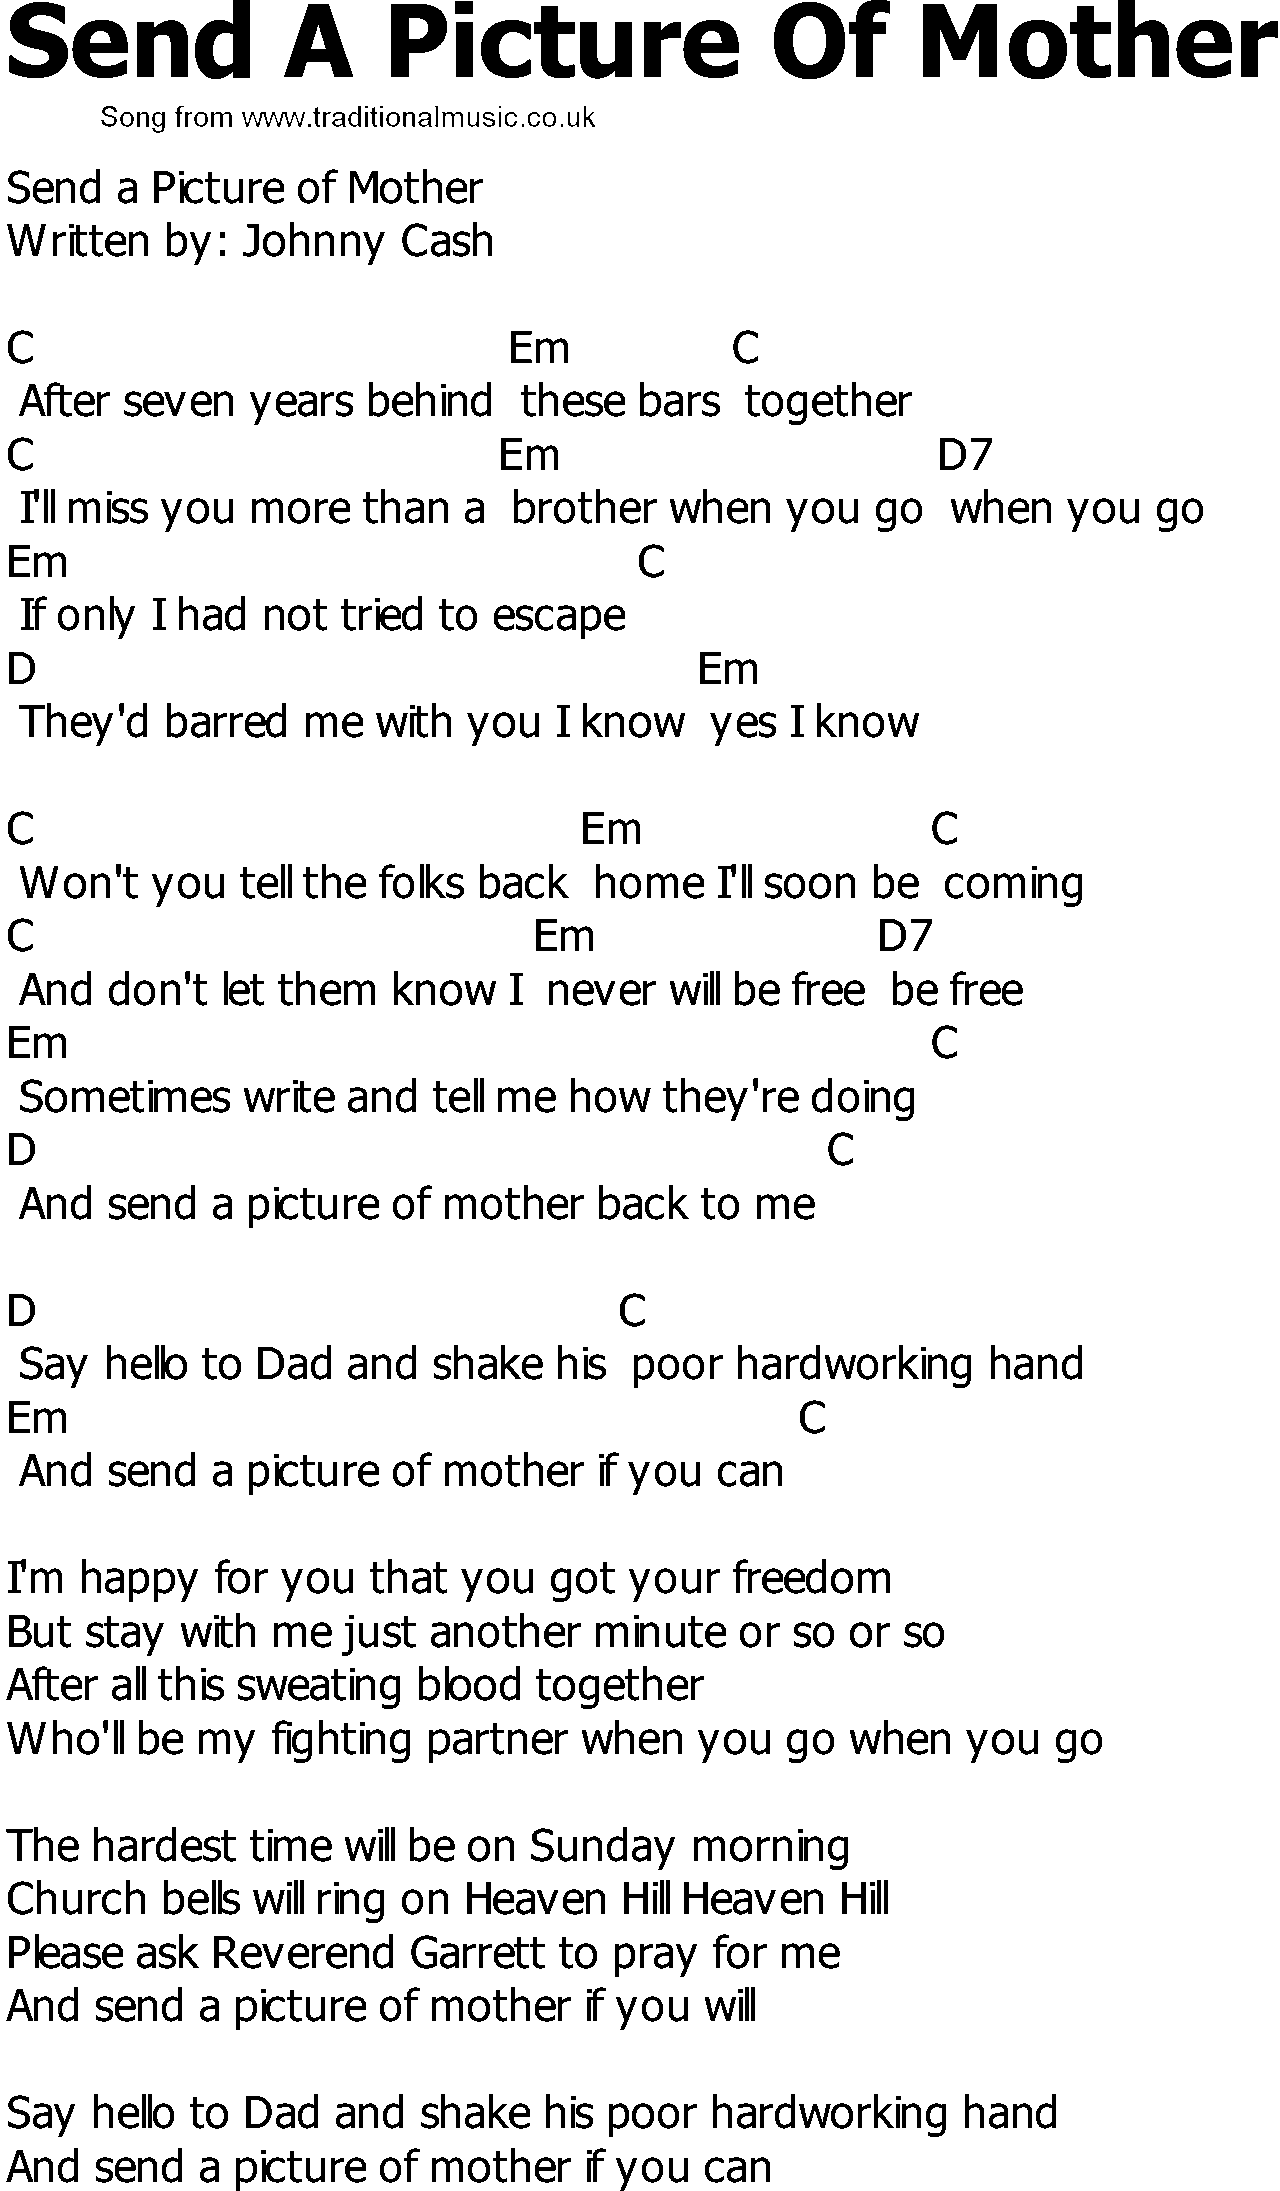 Old Country song lyrics with chords - Send A Picture Of Mother